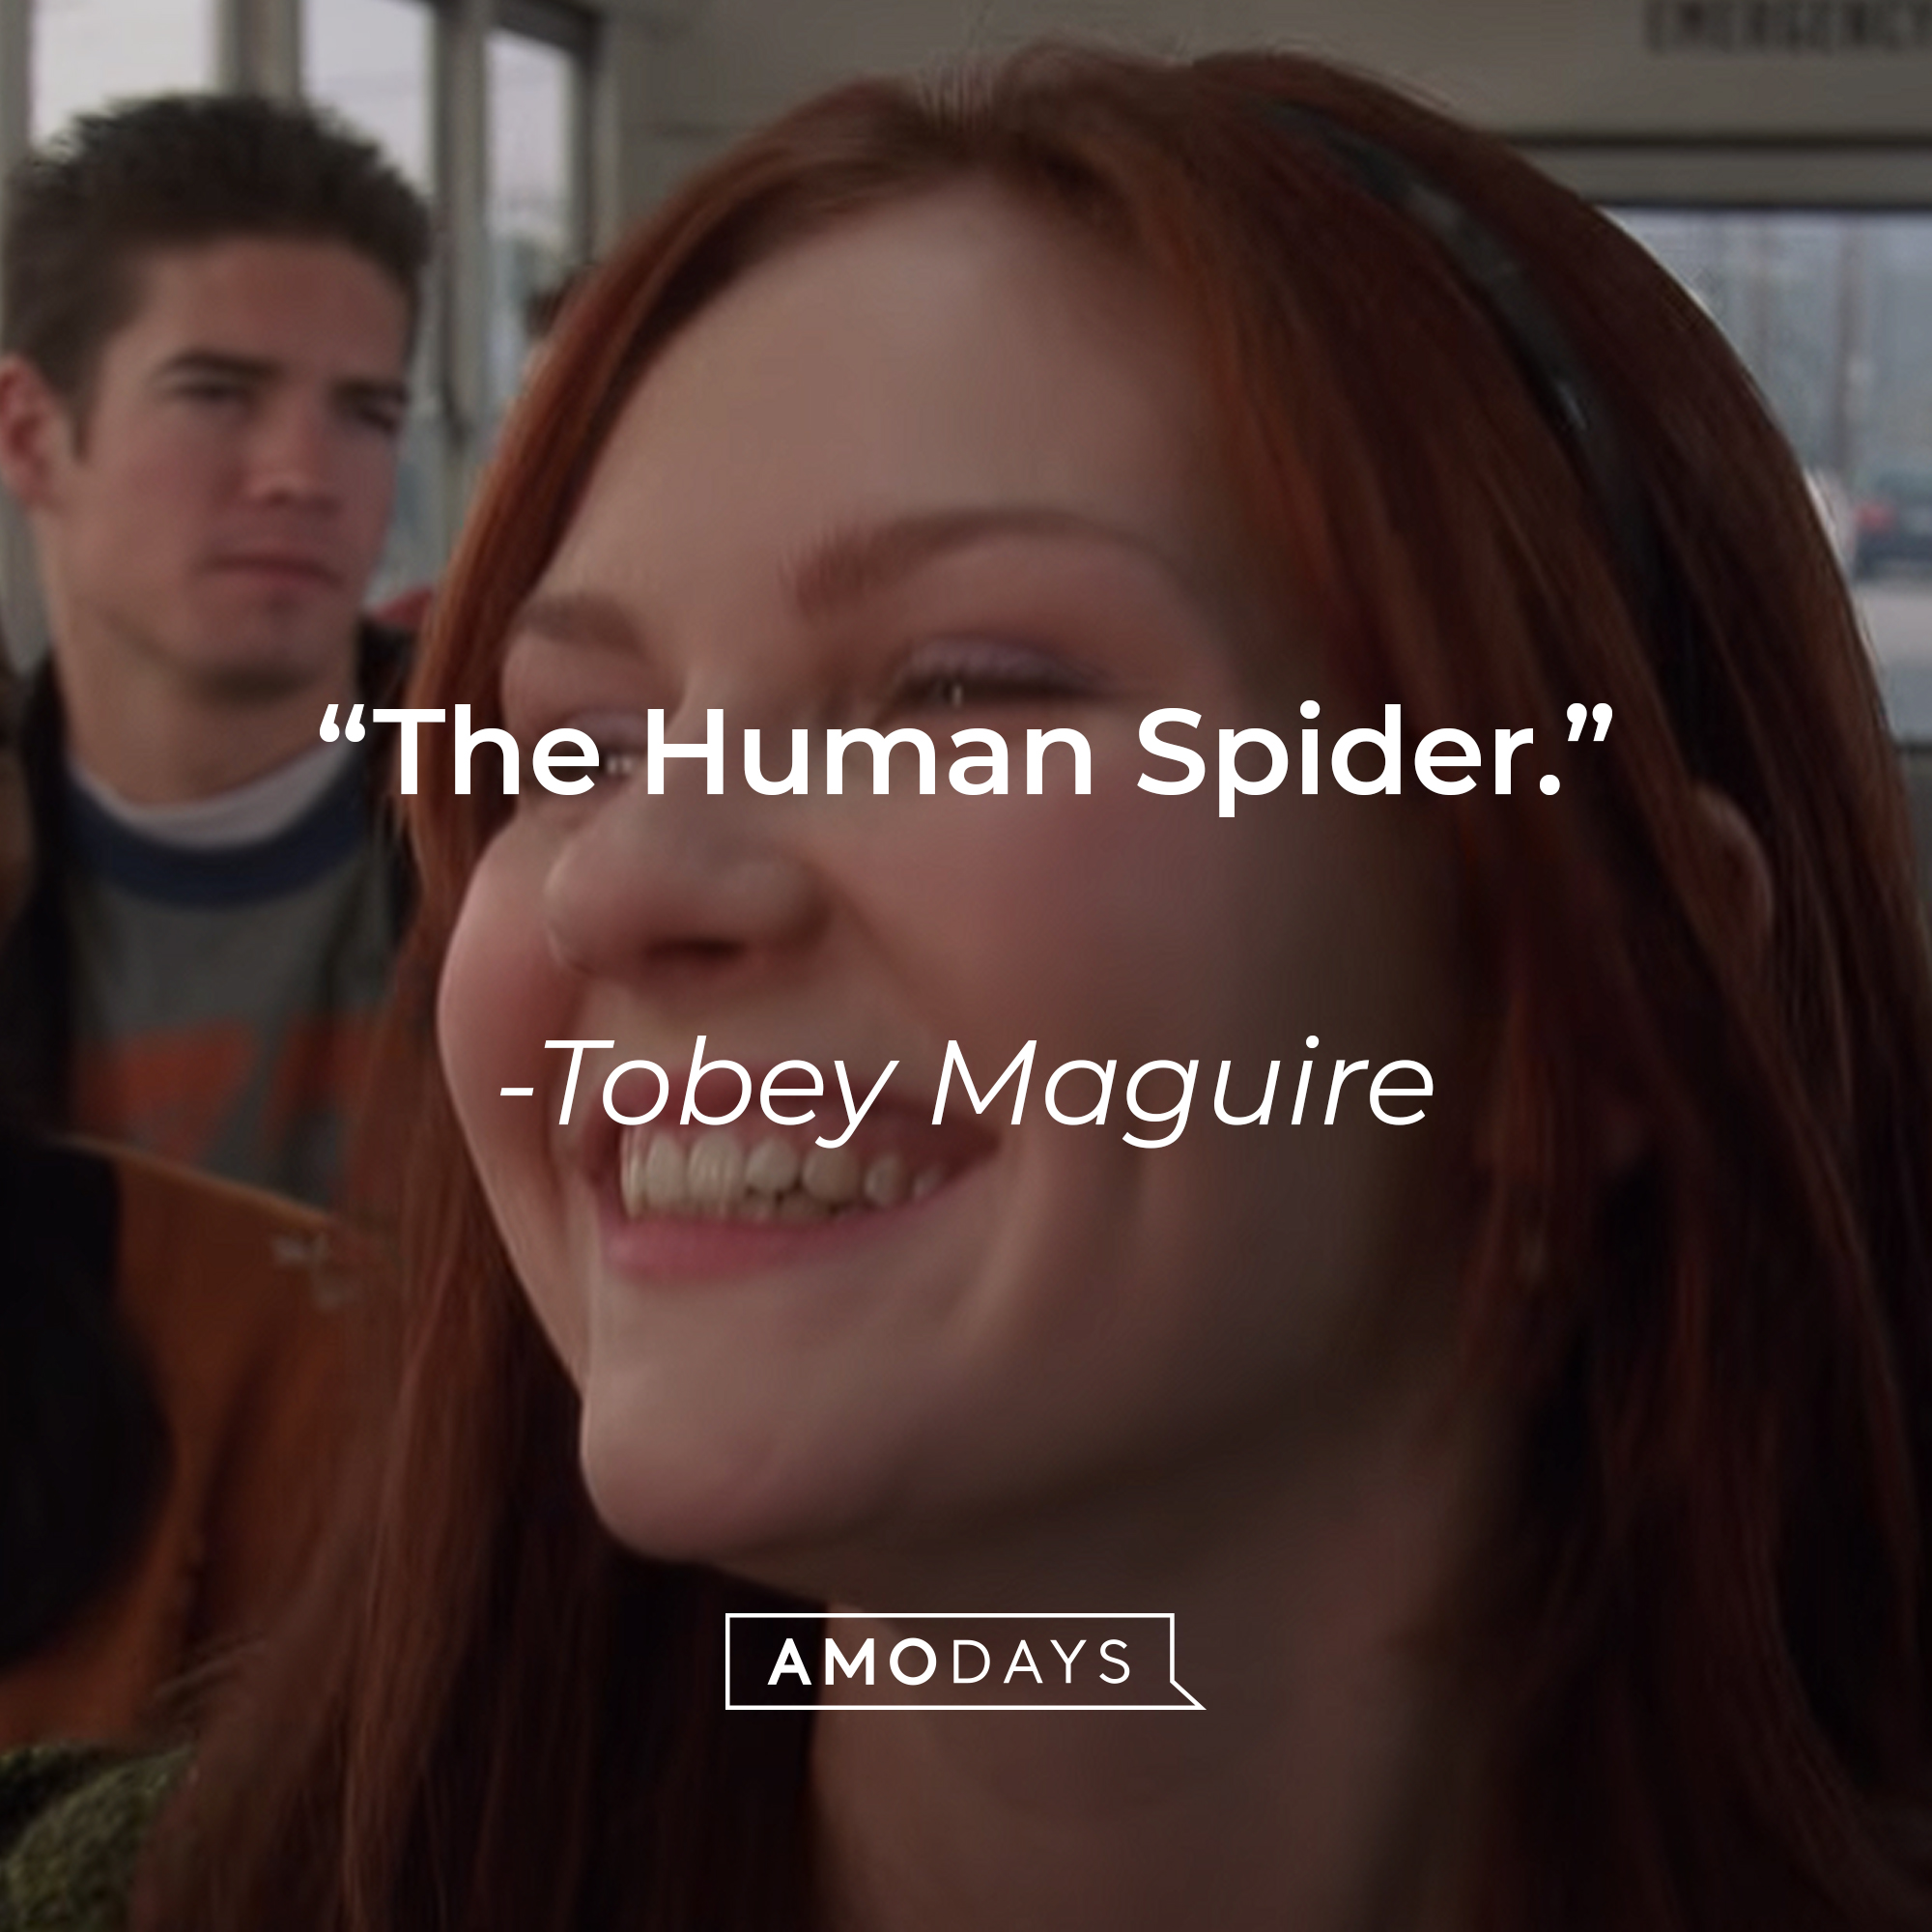 Tobey Maguire's quote: "The Human Spider" | Source: youtube.com/sonypictures